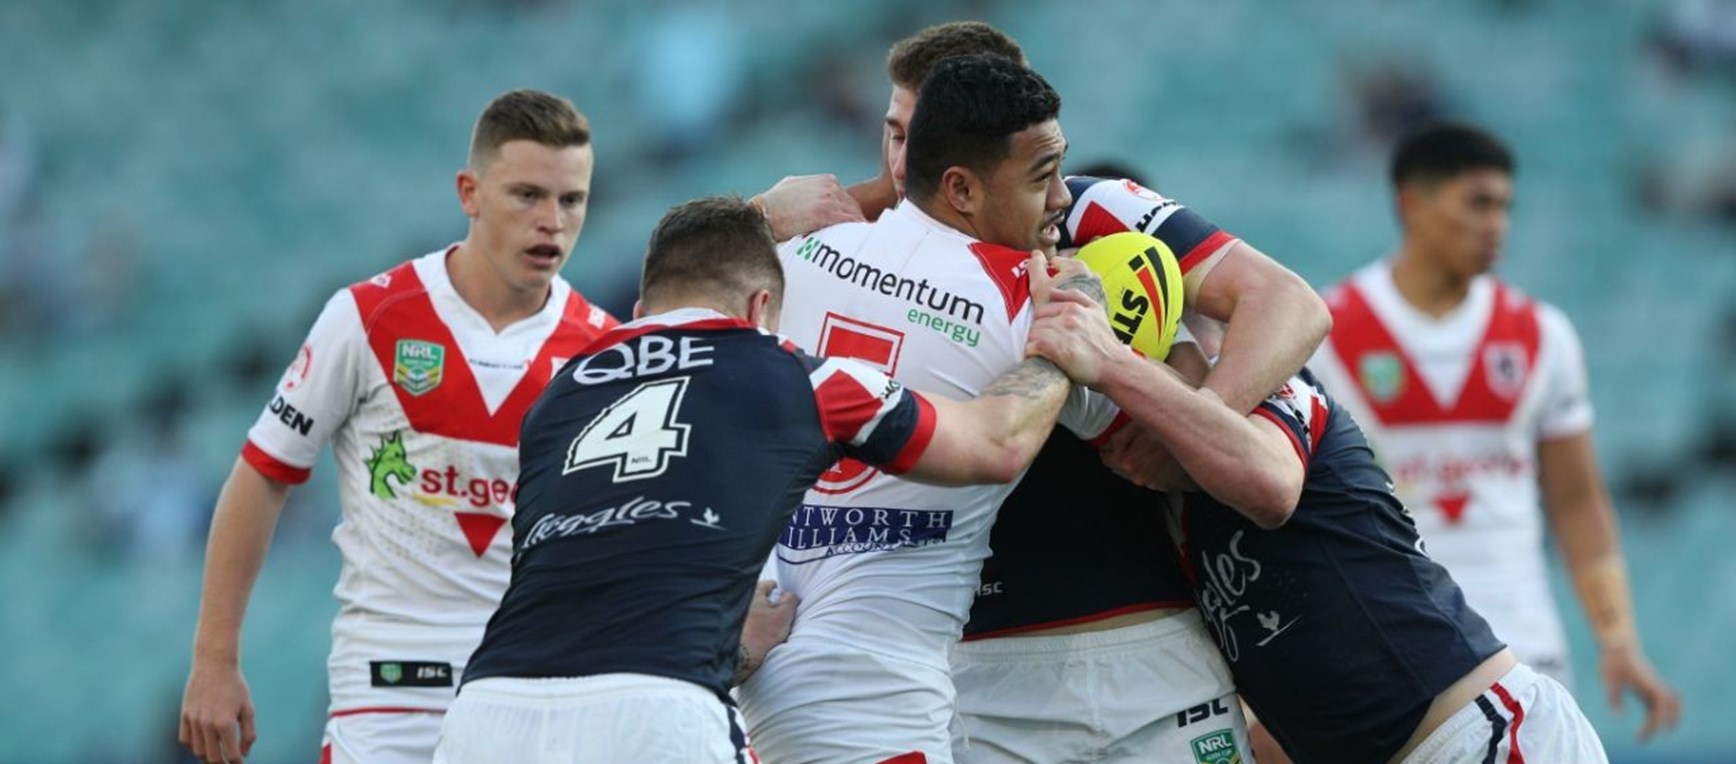 Gallery: NYC Preliminary Final v Sydney Roosters